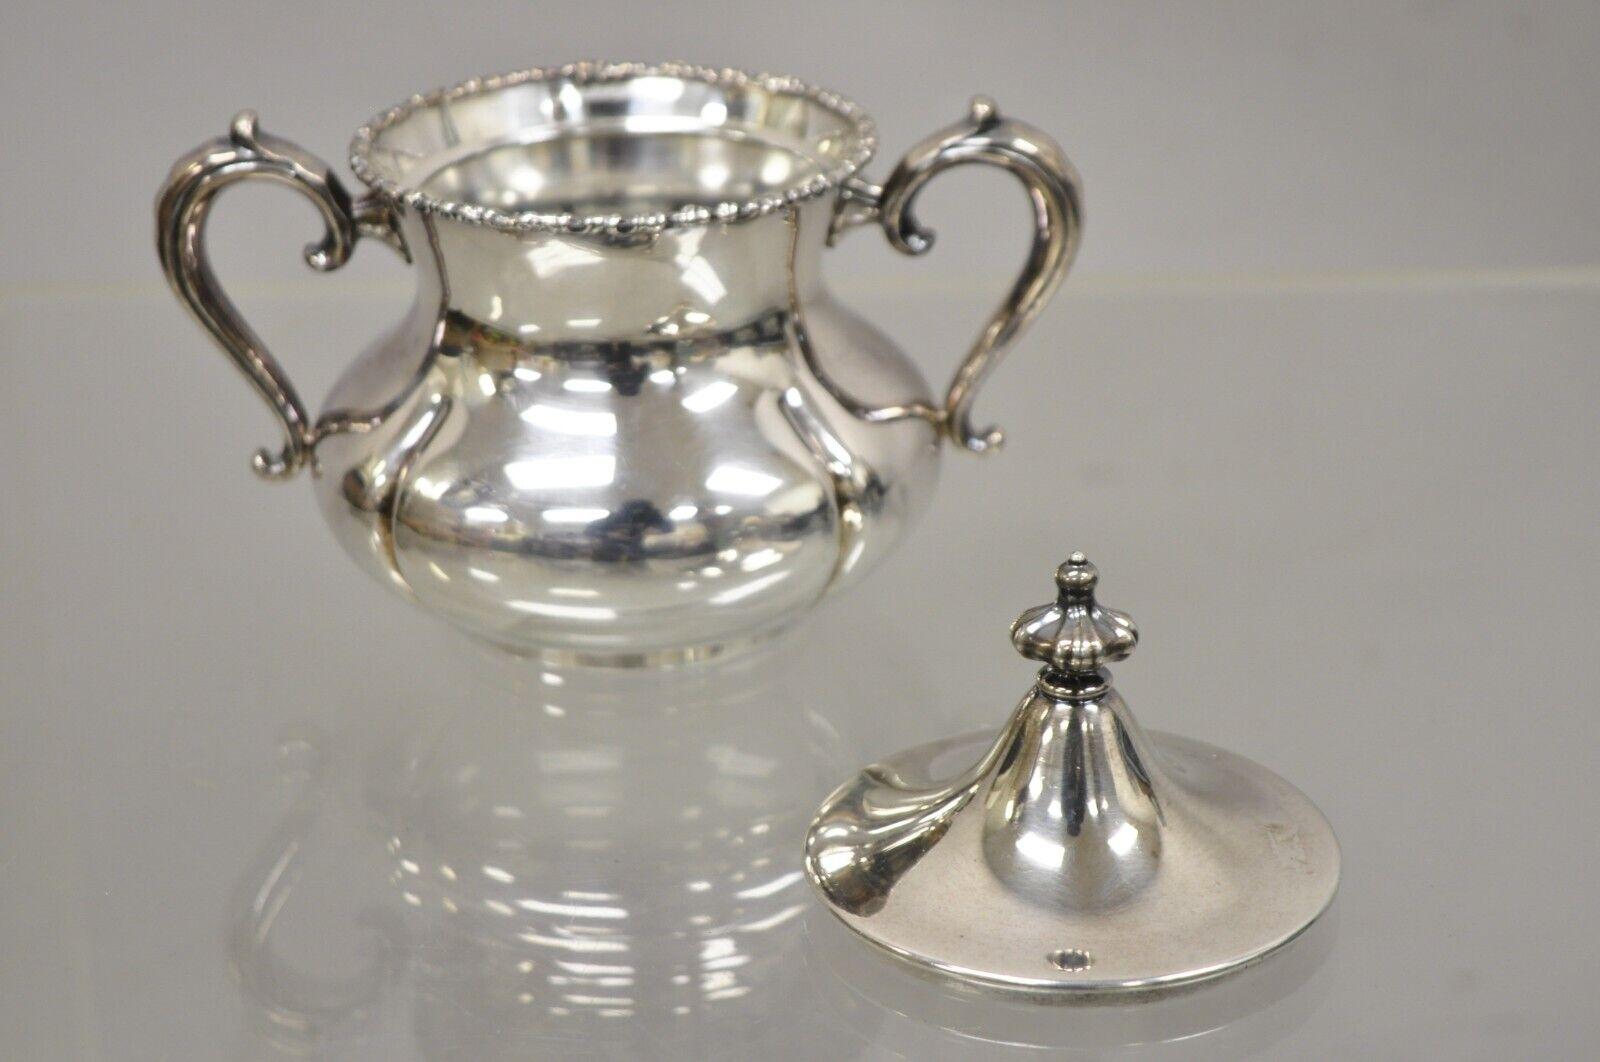 Antique Victorian Silver Plated Tea Set with English Platter Tray, 6 Pc Set 5